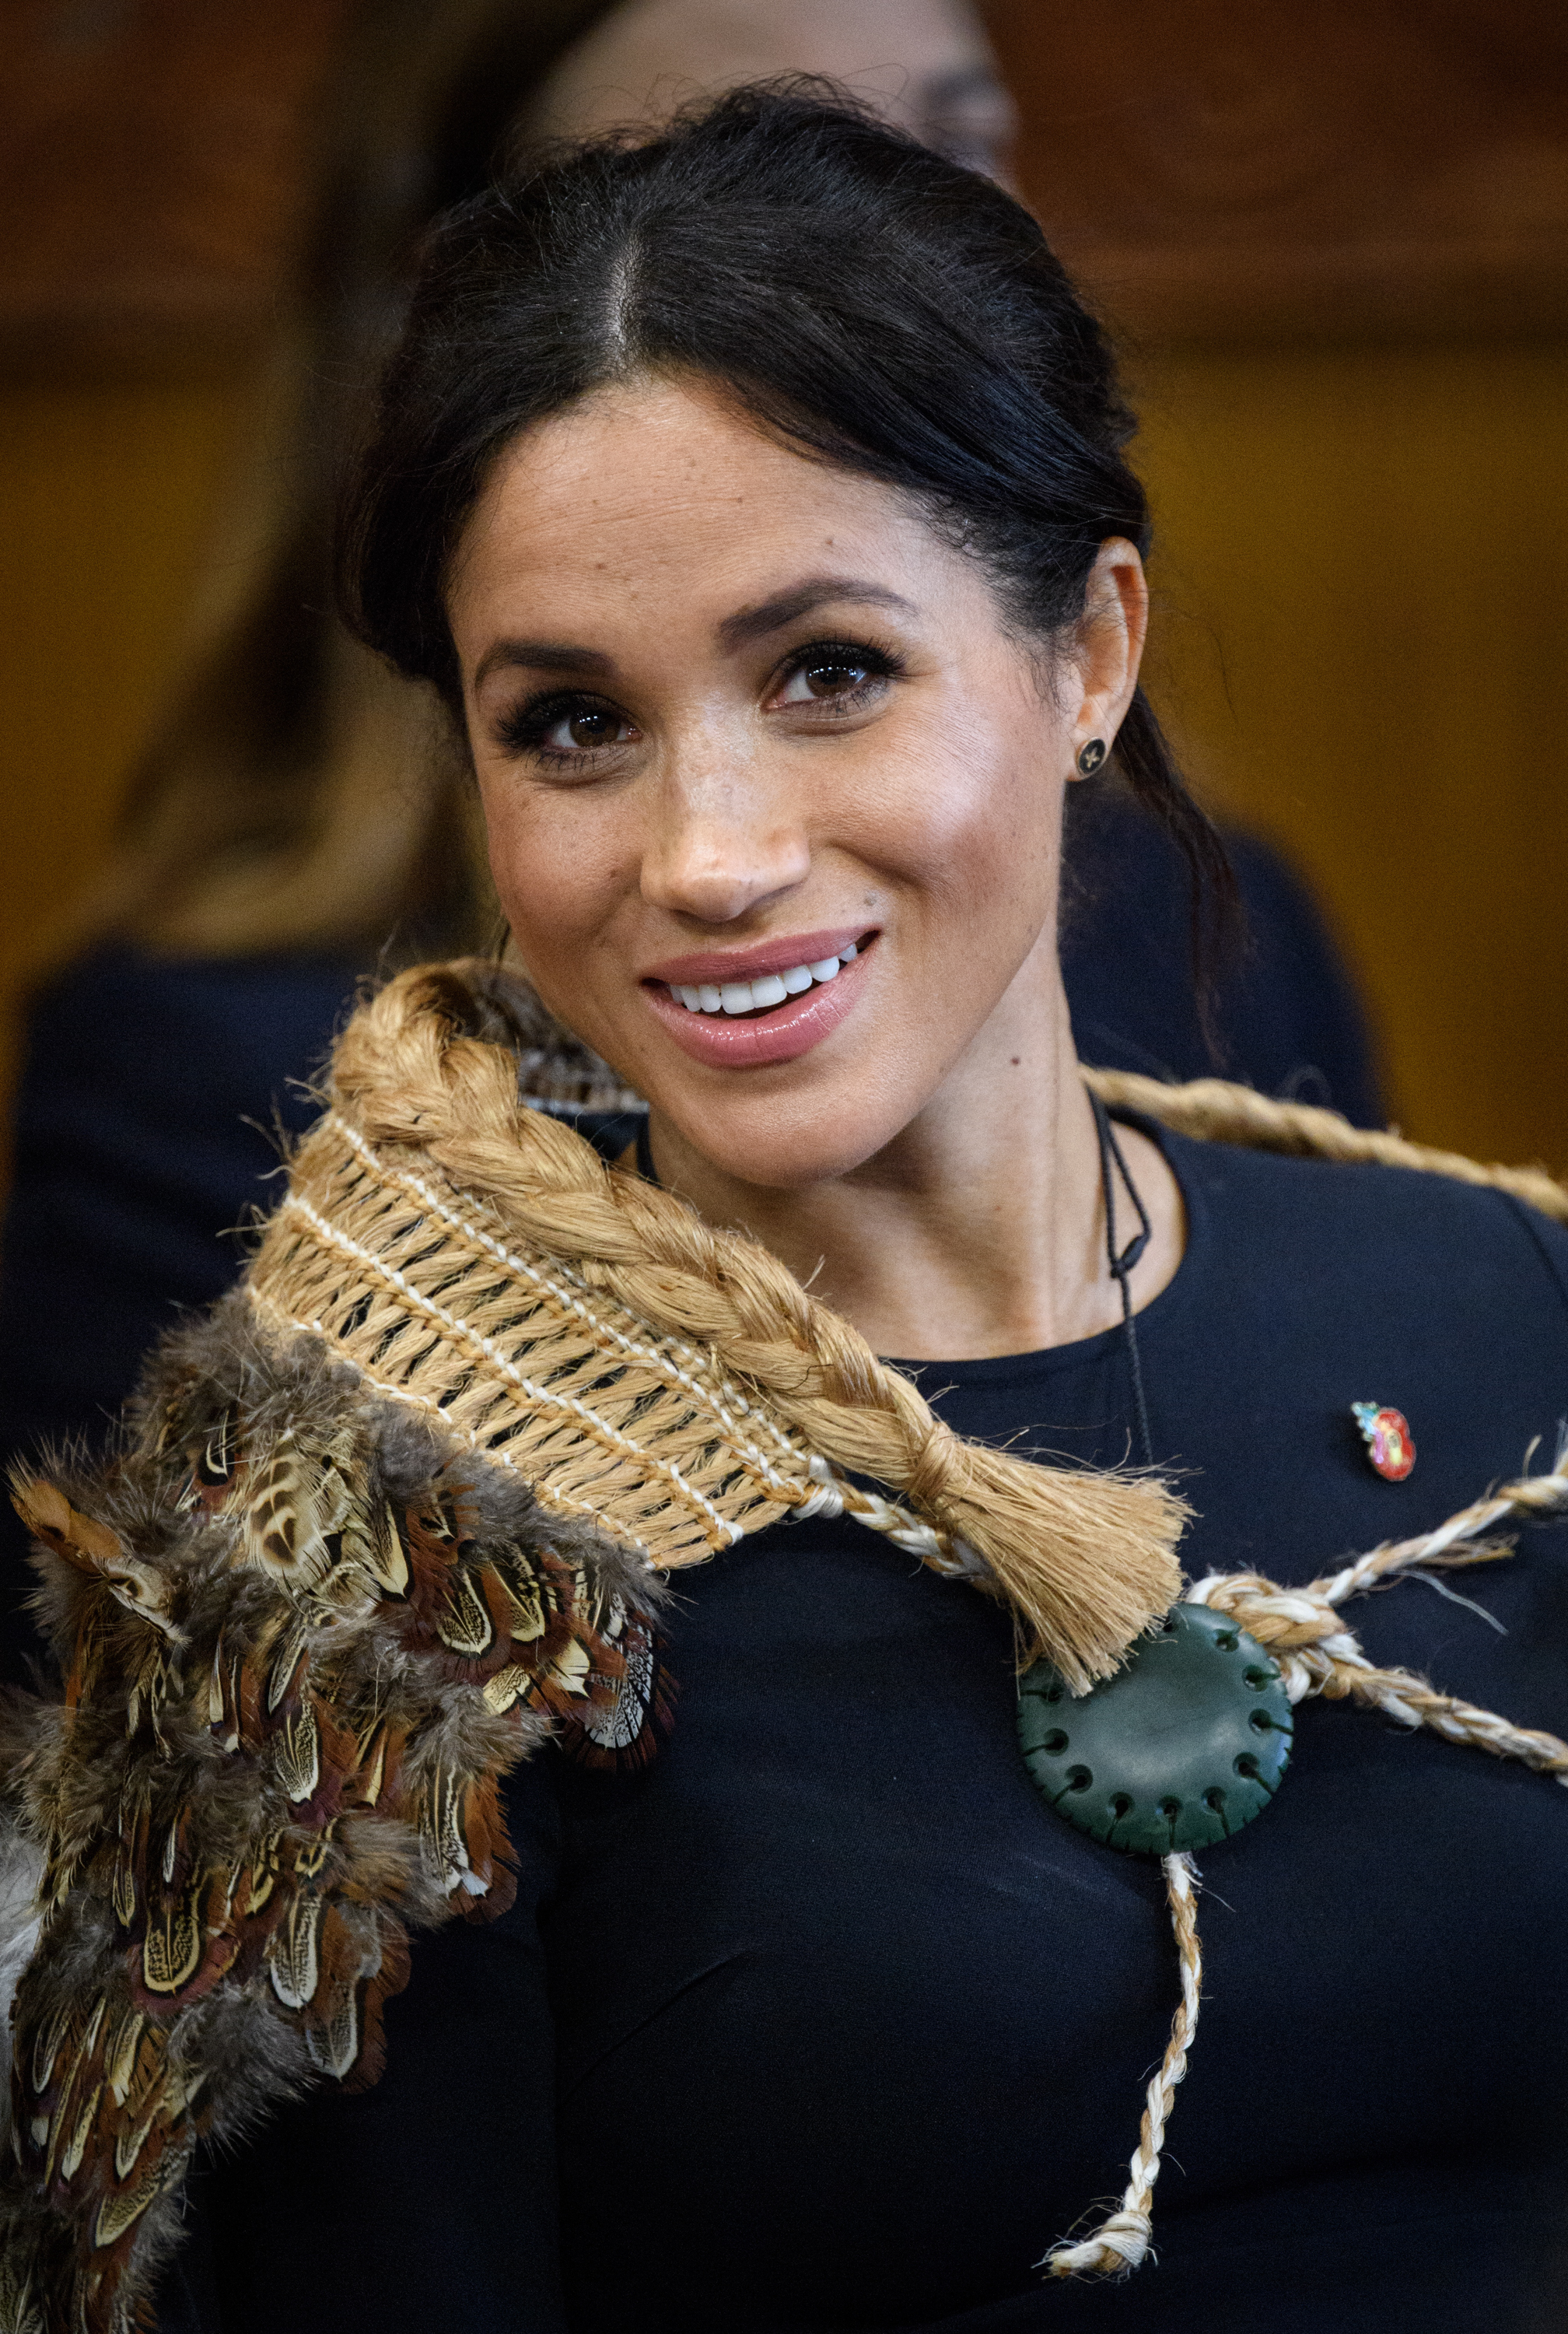 Close-up of Meghan smiling and wearing a feathery shawl